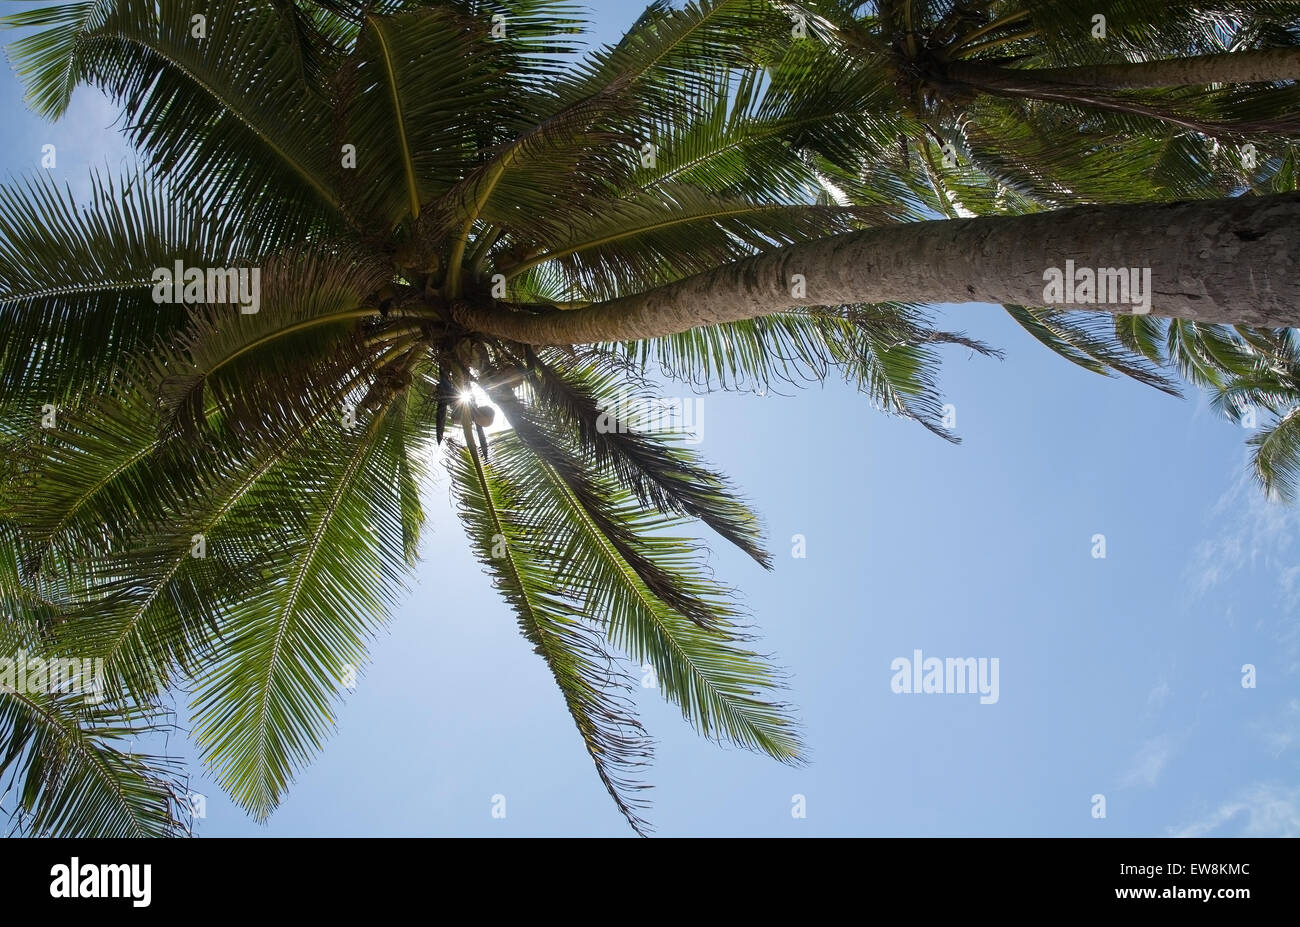 Coconut palm tree with fruit in remote location, Southern Province, Sri Lanka, Asia. Stock Photo